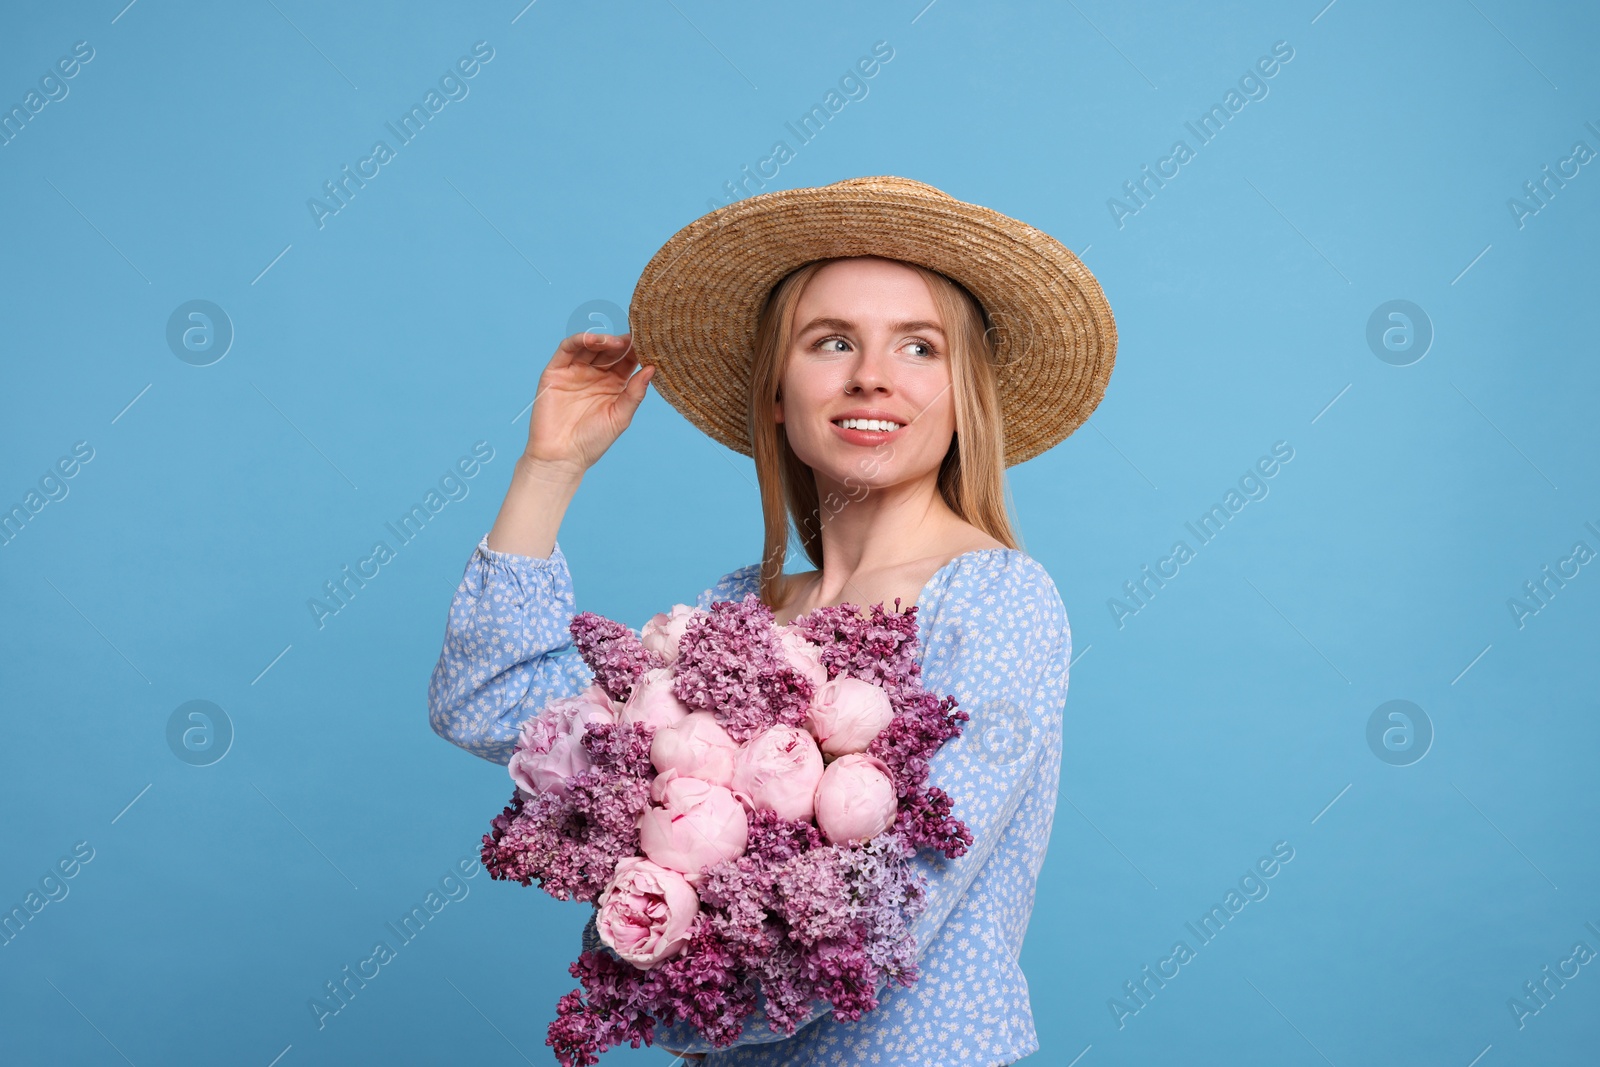 Photo of Beautiful woman with bouquet of spring flowers on light blue background